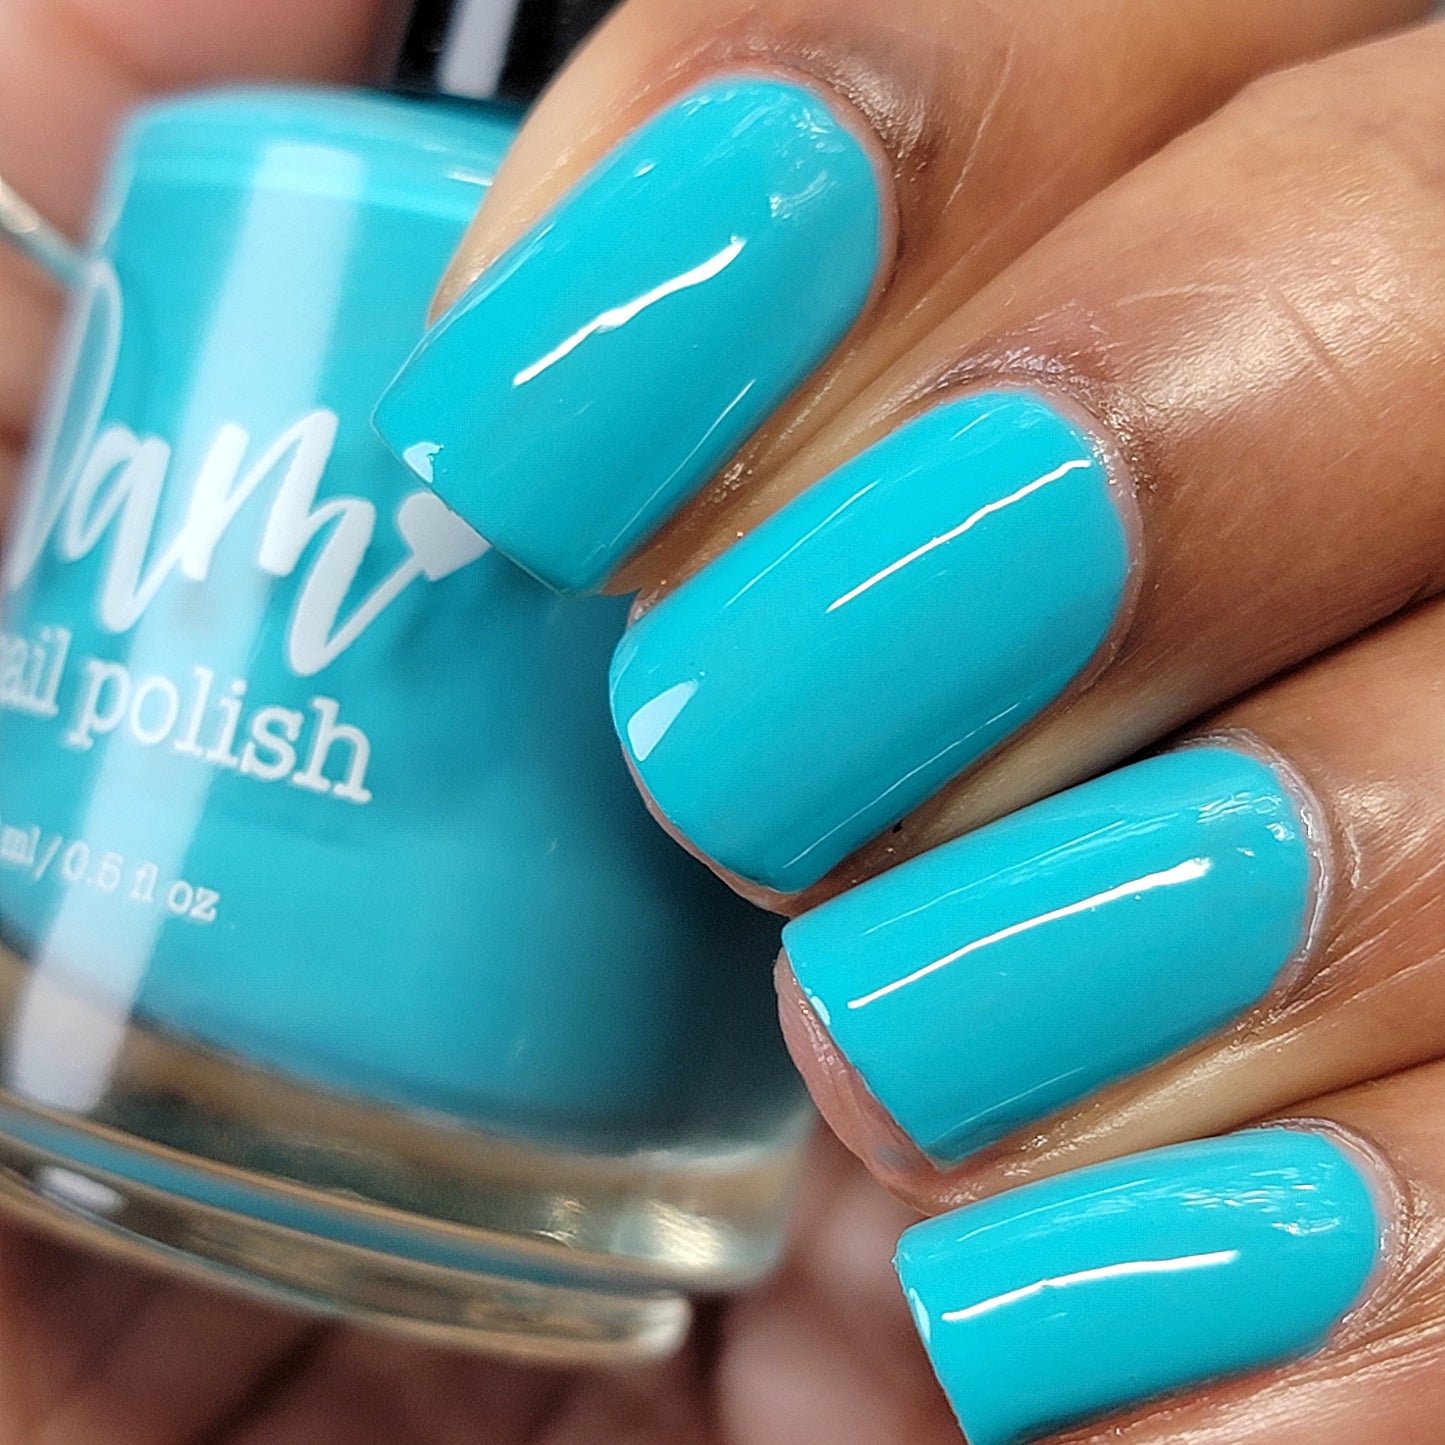 Third Scoops a Charm - Teal Creme Nail Polish - Limited Edition Creme Connection Facebook Group Custom